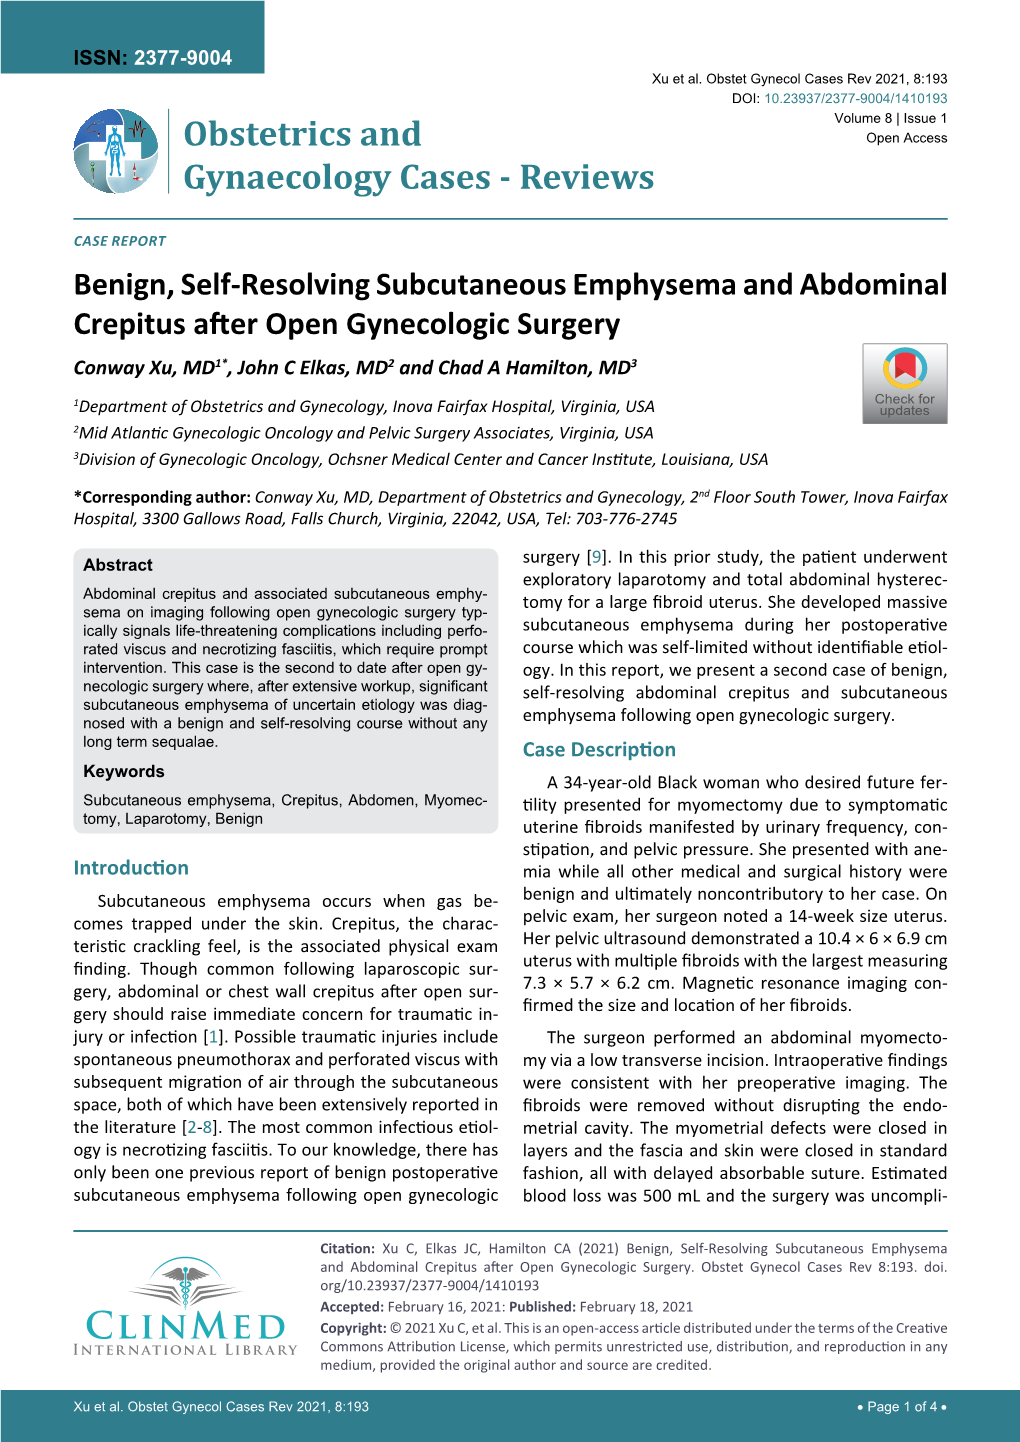 Benign, Self-Resolving Subcutaneous Emphysema and Abdominal Crepitus After Open Gynecologic Surgery Conway Xu, MD1*, John C Elkas, MD2 and Chad a Hamilton, MD3